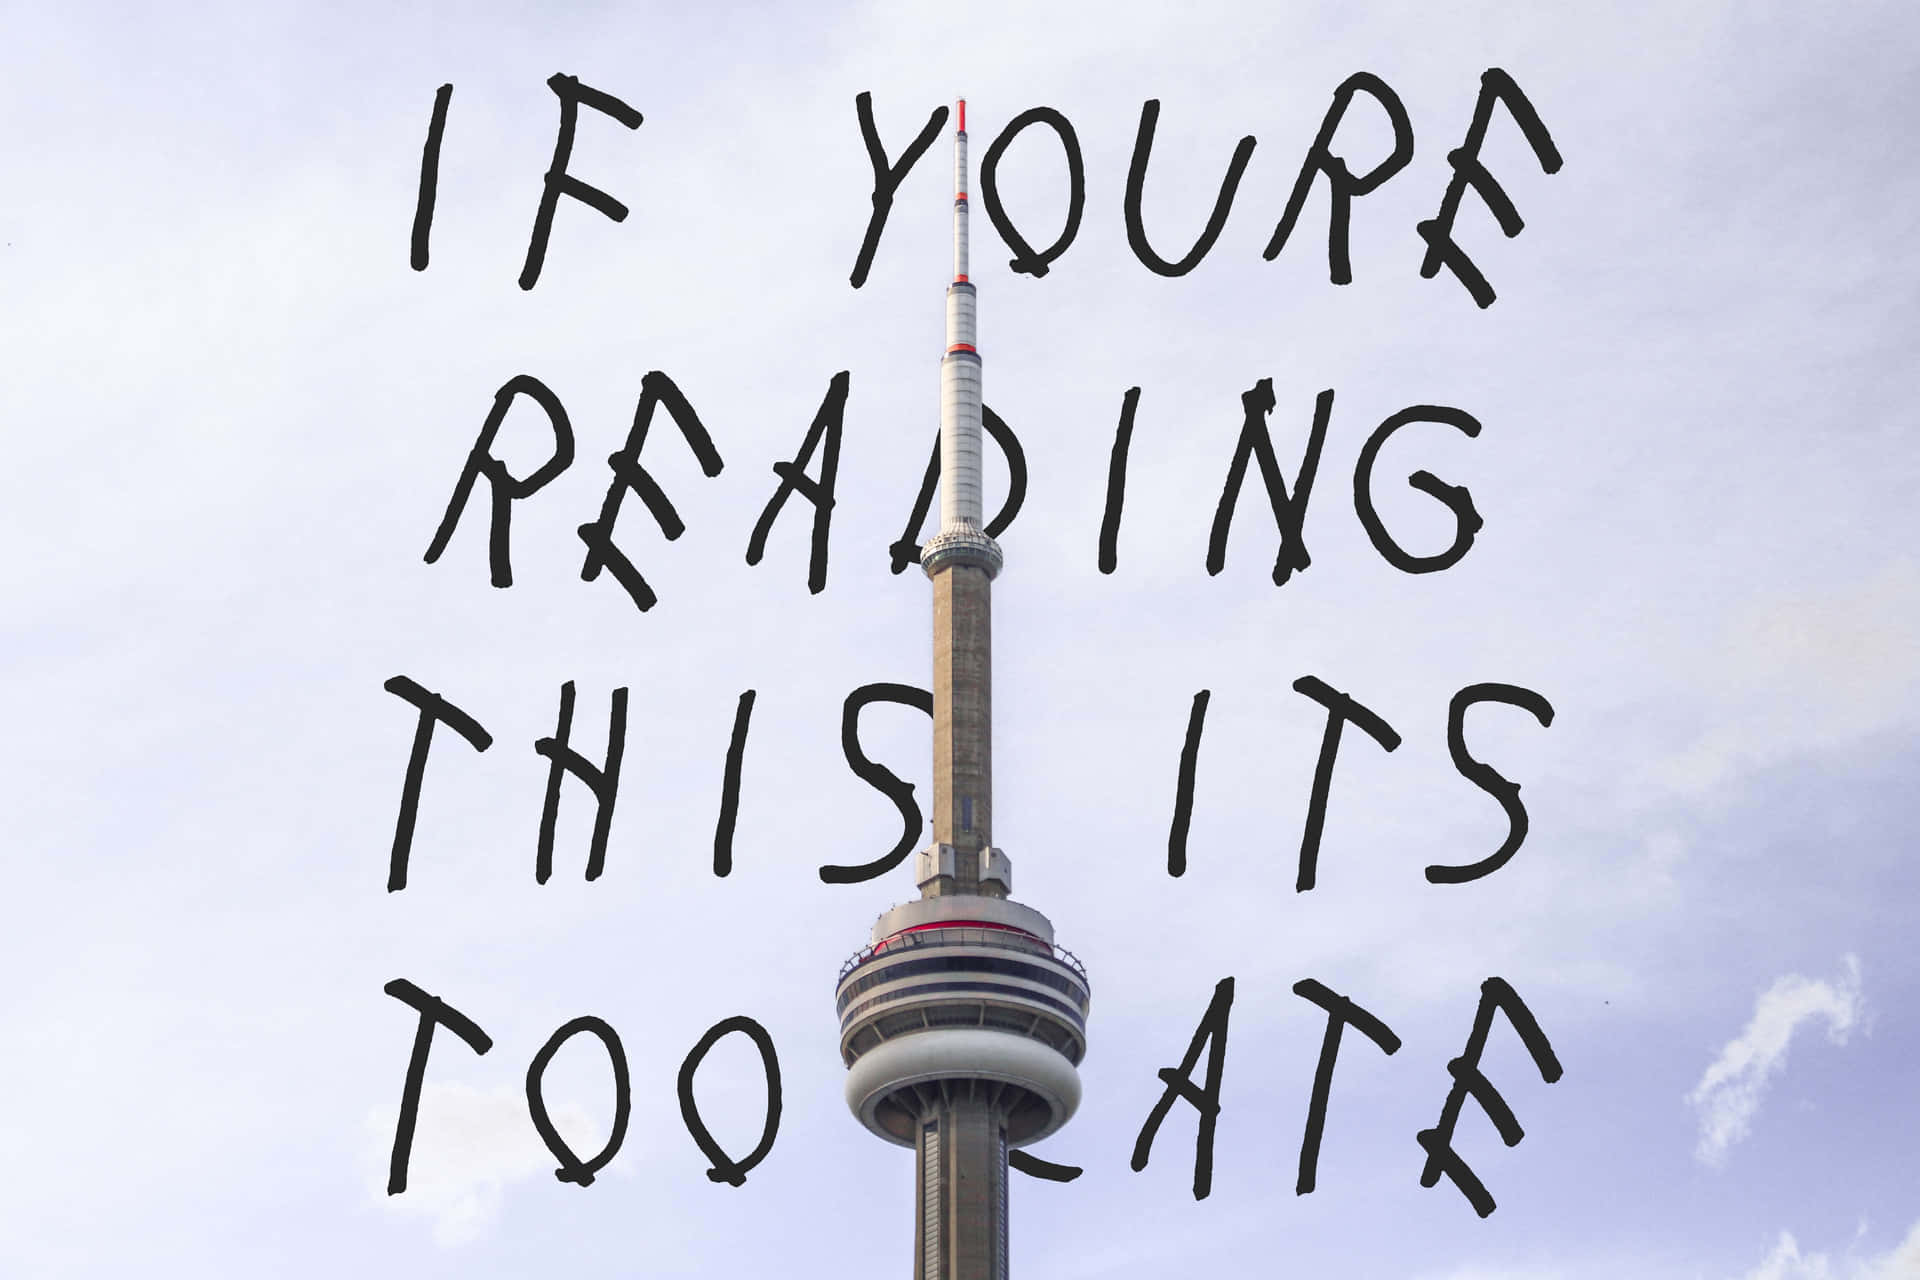 “If you’re reading this, it’s too late.” - Drake Wallpaper